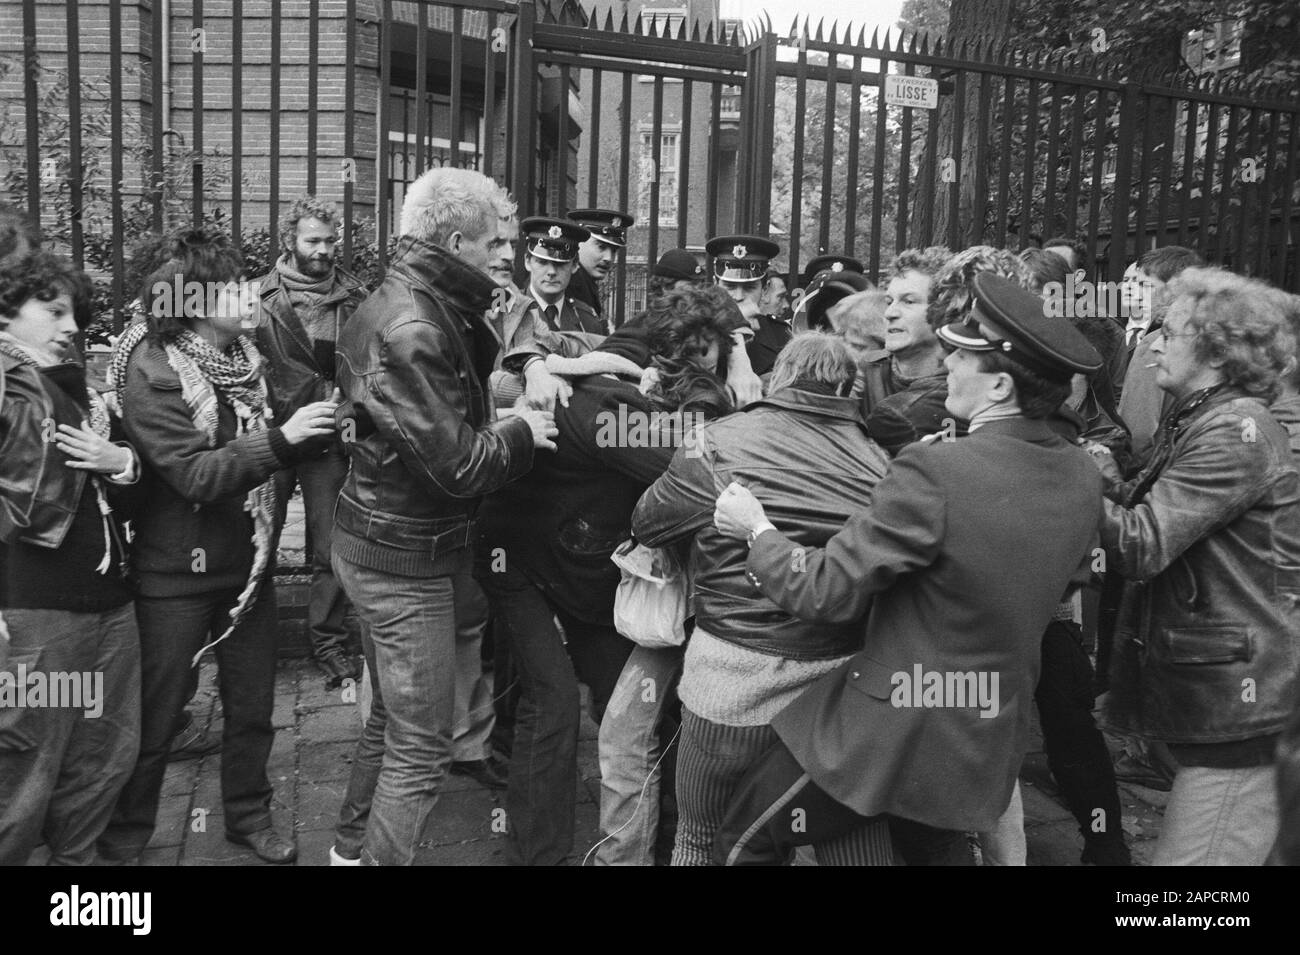 Action at the US Consulate against the invasion of the US in Grenada after a coup Date: October 26, 1983 Location: Amsterdam, Noord-Holland Keywords: demonstrations, consulates, military operations, police officers Stock Photo